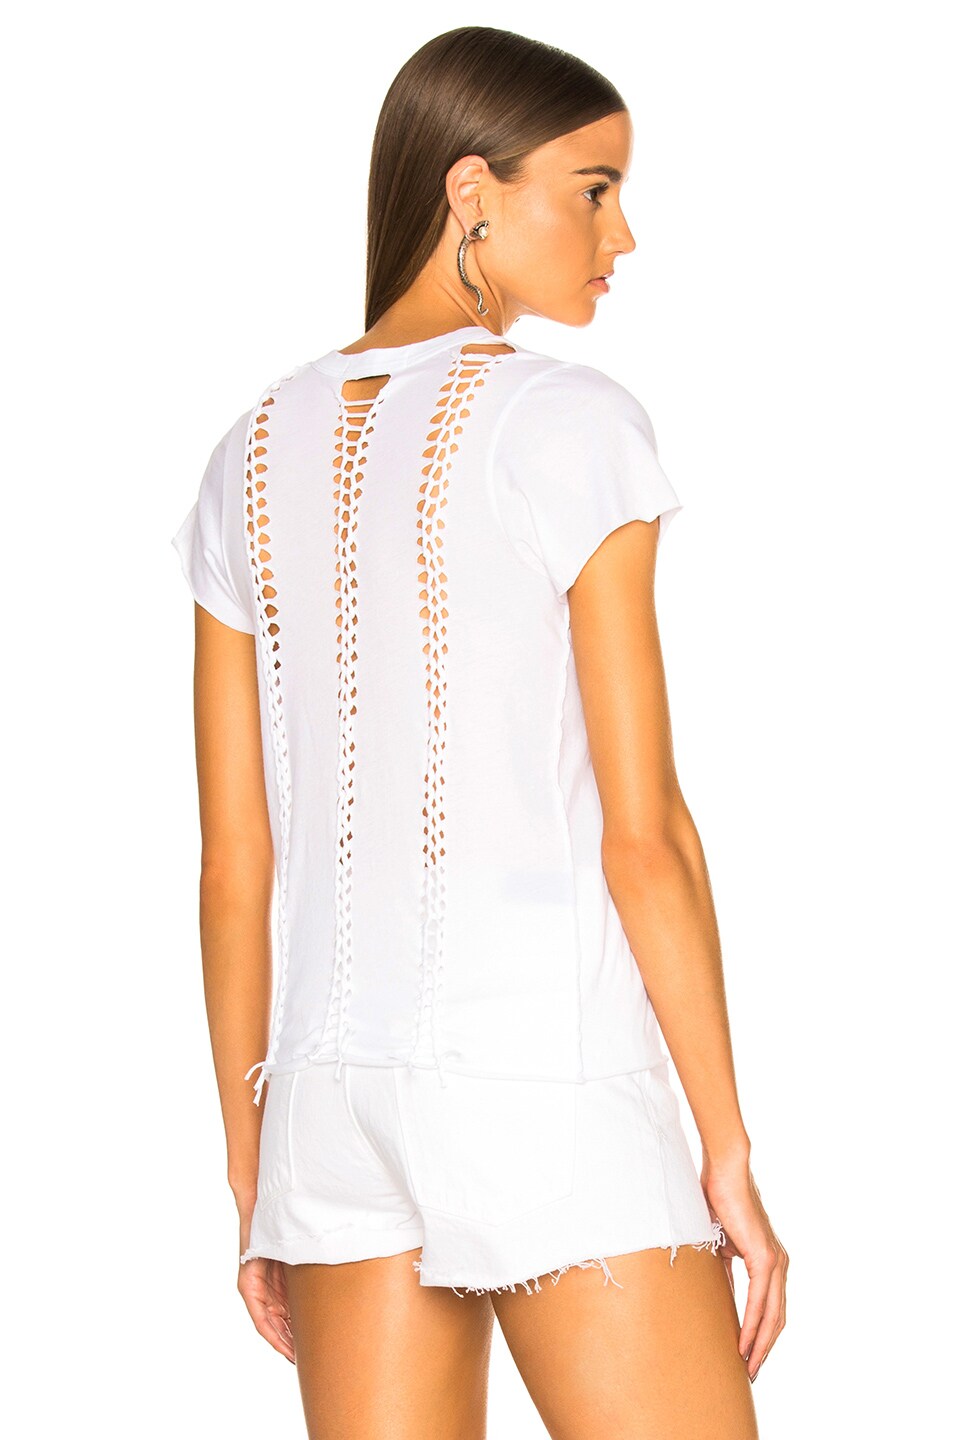 Image 1 of ICONS Objects of Devotion Braid Back Short Sleeve Tee in White